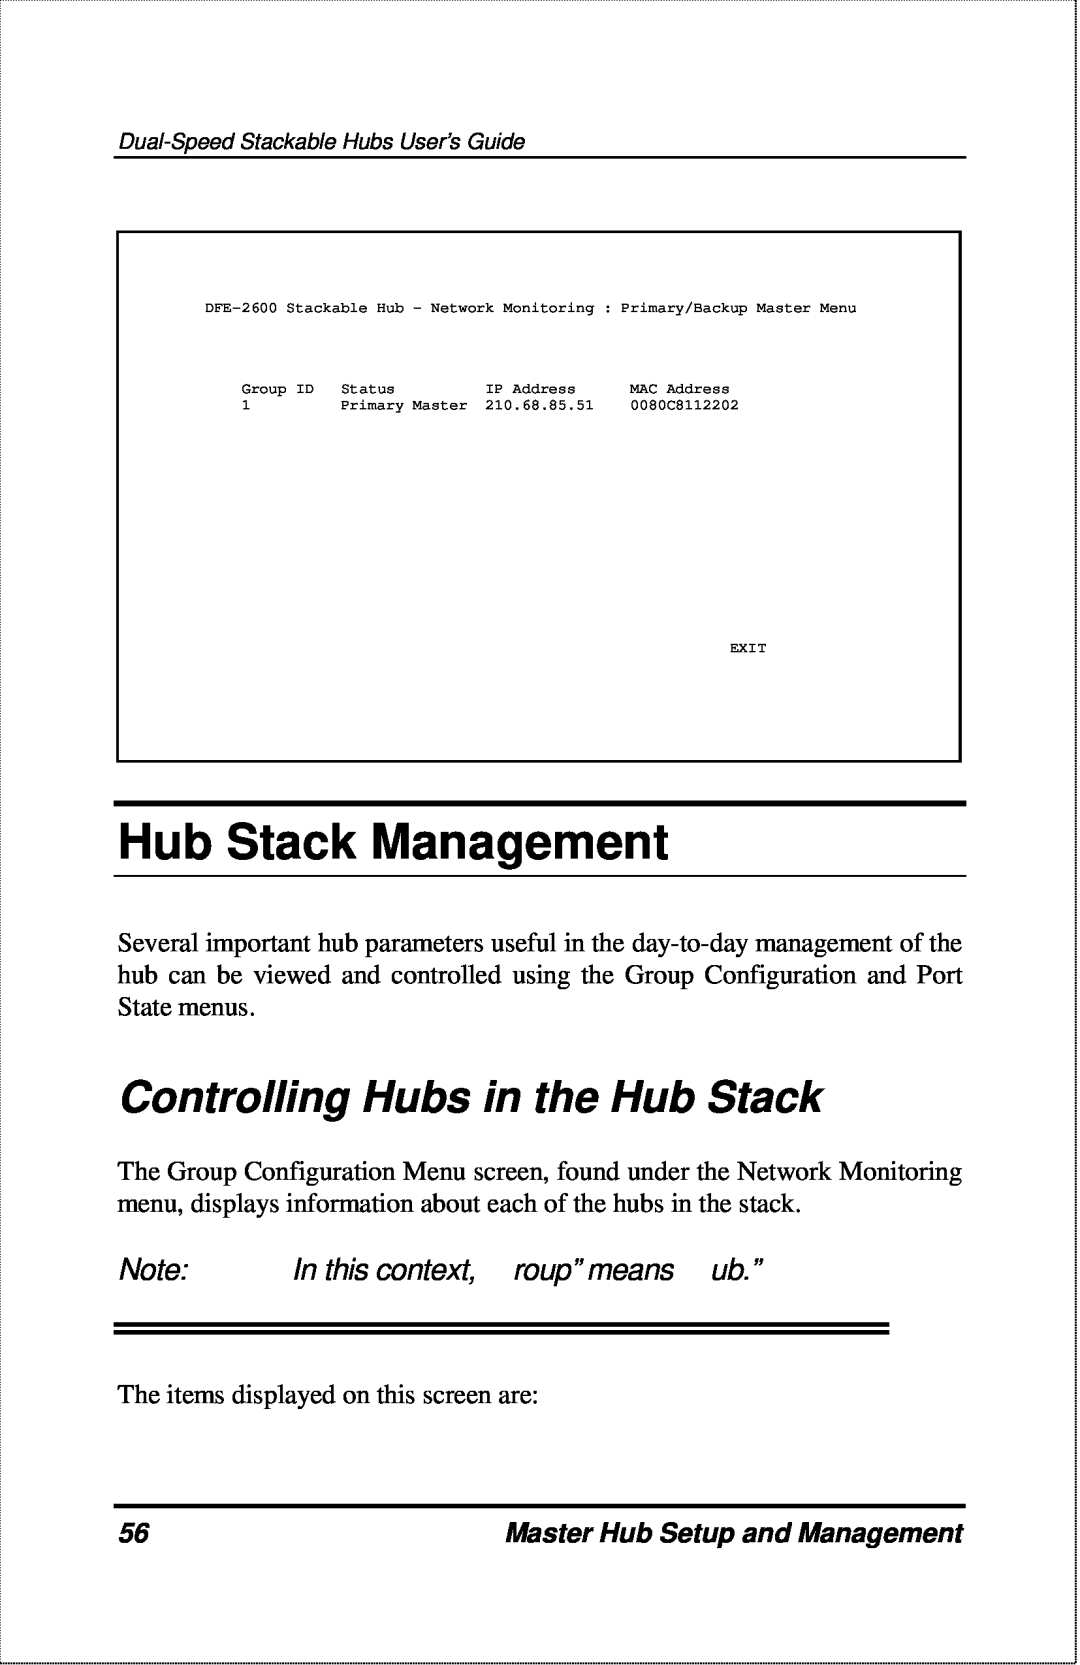 D-Link DFE-2600 manual Hub Stack Management, Controlling Hubs in the Hub Stack, In this context, roup” means ub.” 